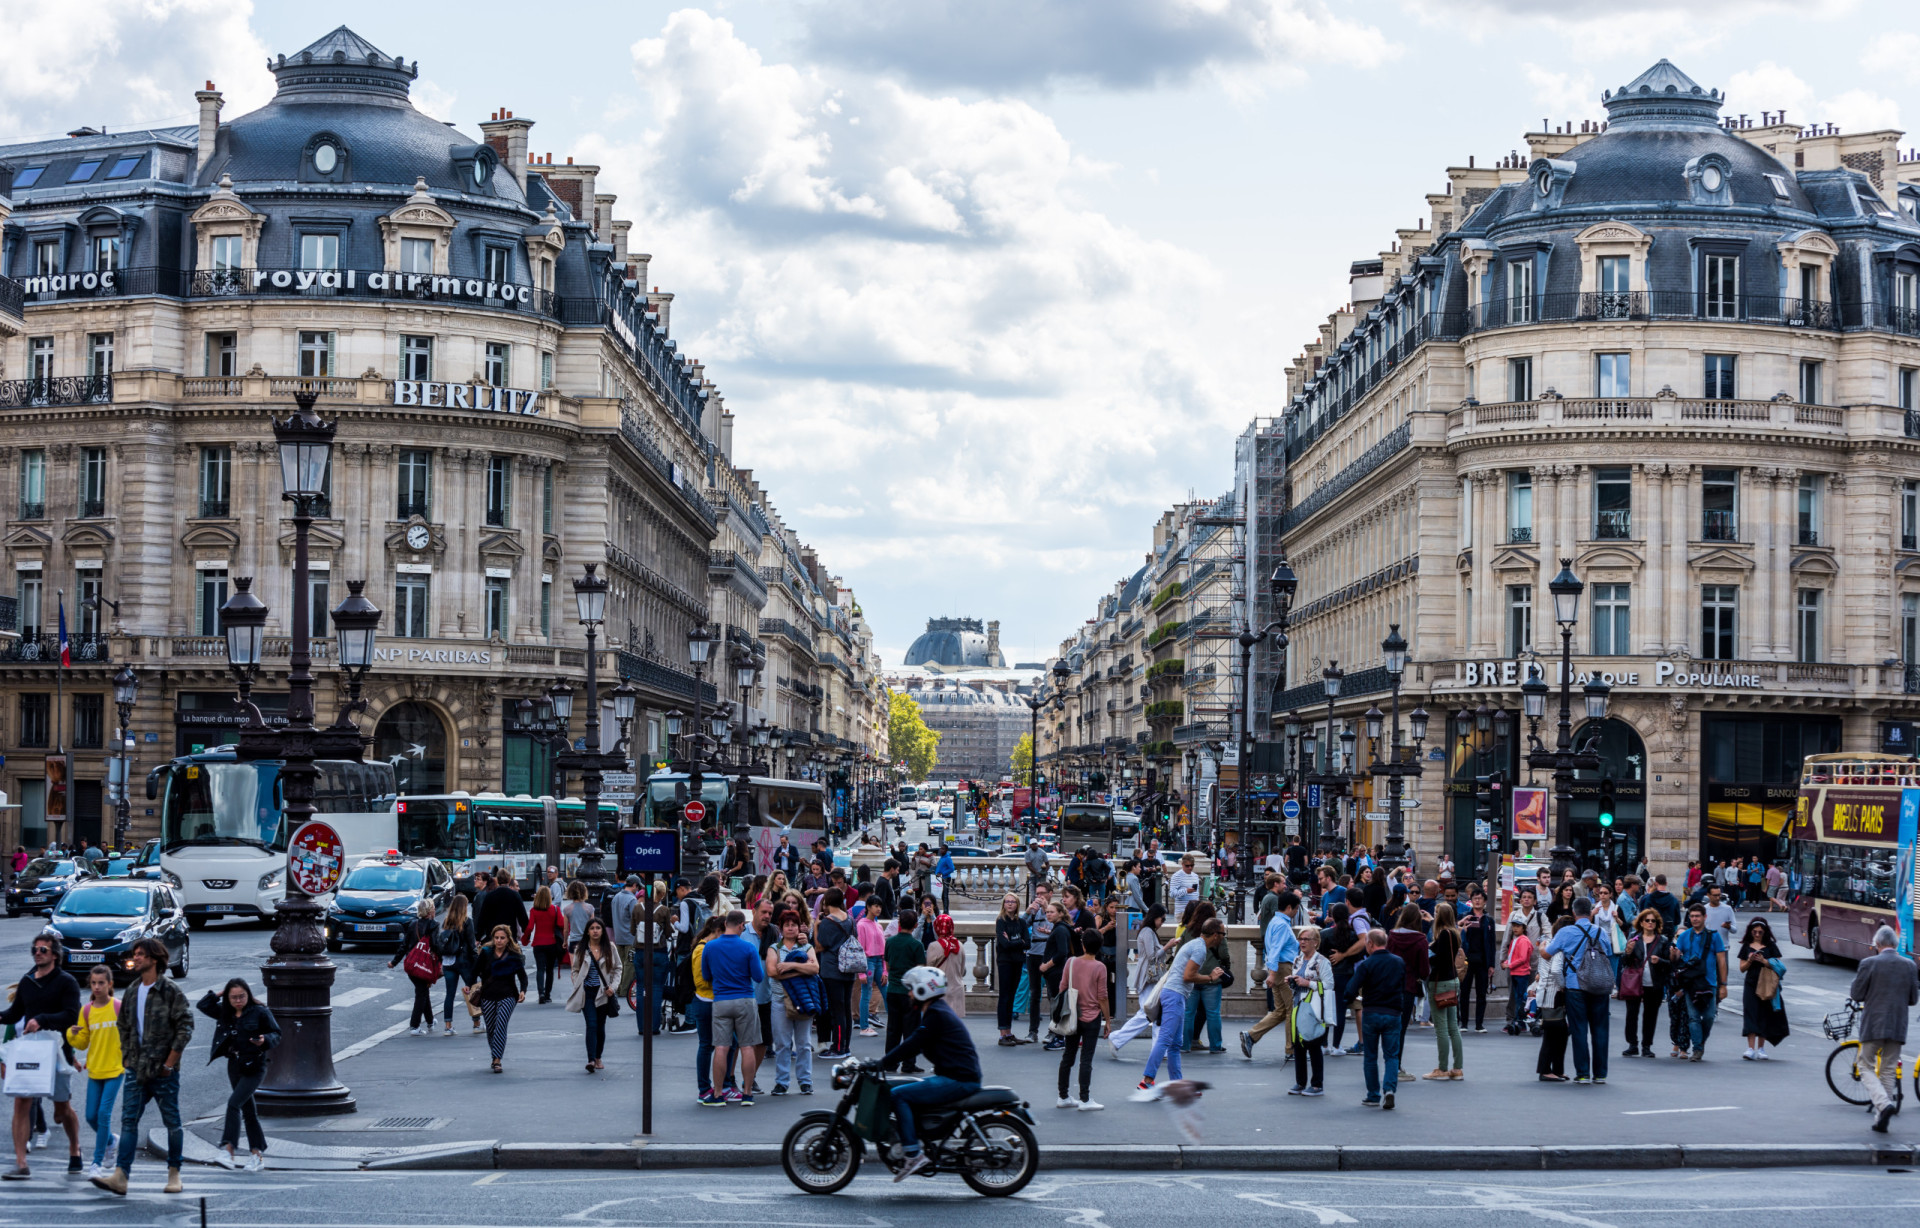 <p>With the rush of daily life, the romantic image of Paris might fade away. But that doesn't mean you won't find French romance!</p><p>Sources: (<a href="https://www.nbcnews.com/id/wbna15391010" rel="noopener">NBC News</a>) (<a href="https://matadornetwork.com/read/paris-syndrome/" rel="noopener">Matador Network</a>) (<a href="https://www.livescience.com/what-is-paris-syndrome" rel="noopener">Live Science</a>) </p><p>See also: <a href="https://www.starsinsider.com/health/442525/everyday-things-you-didnt-realize-are-harming-your-mental-health">Everyday things you didn't realize is harming your mental health</a>  </p><p>You may also like:<a href="https://www.starsinsider.com/n/319500?utm_source=msn.com&utm_medium=display&utm_campaign=referral_description&utm_content=524572en-us"> Gruesome Valentine's Day murders</a></p>